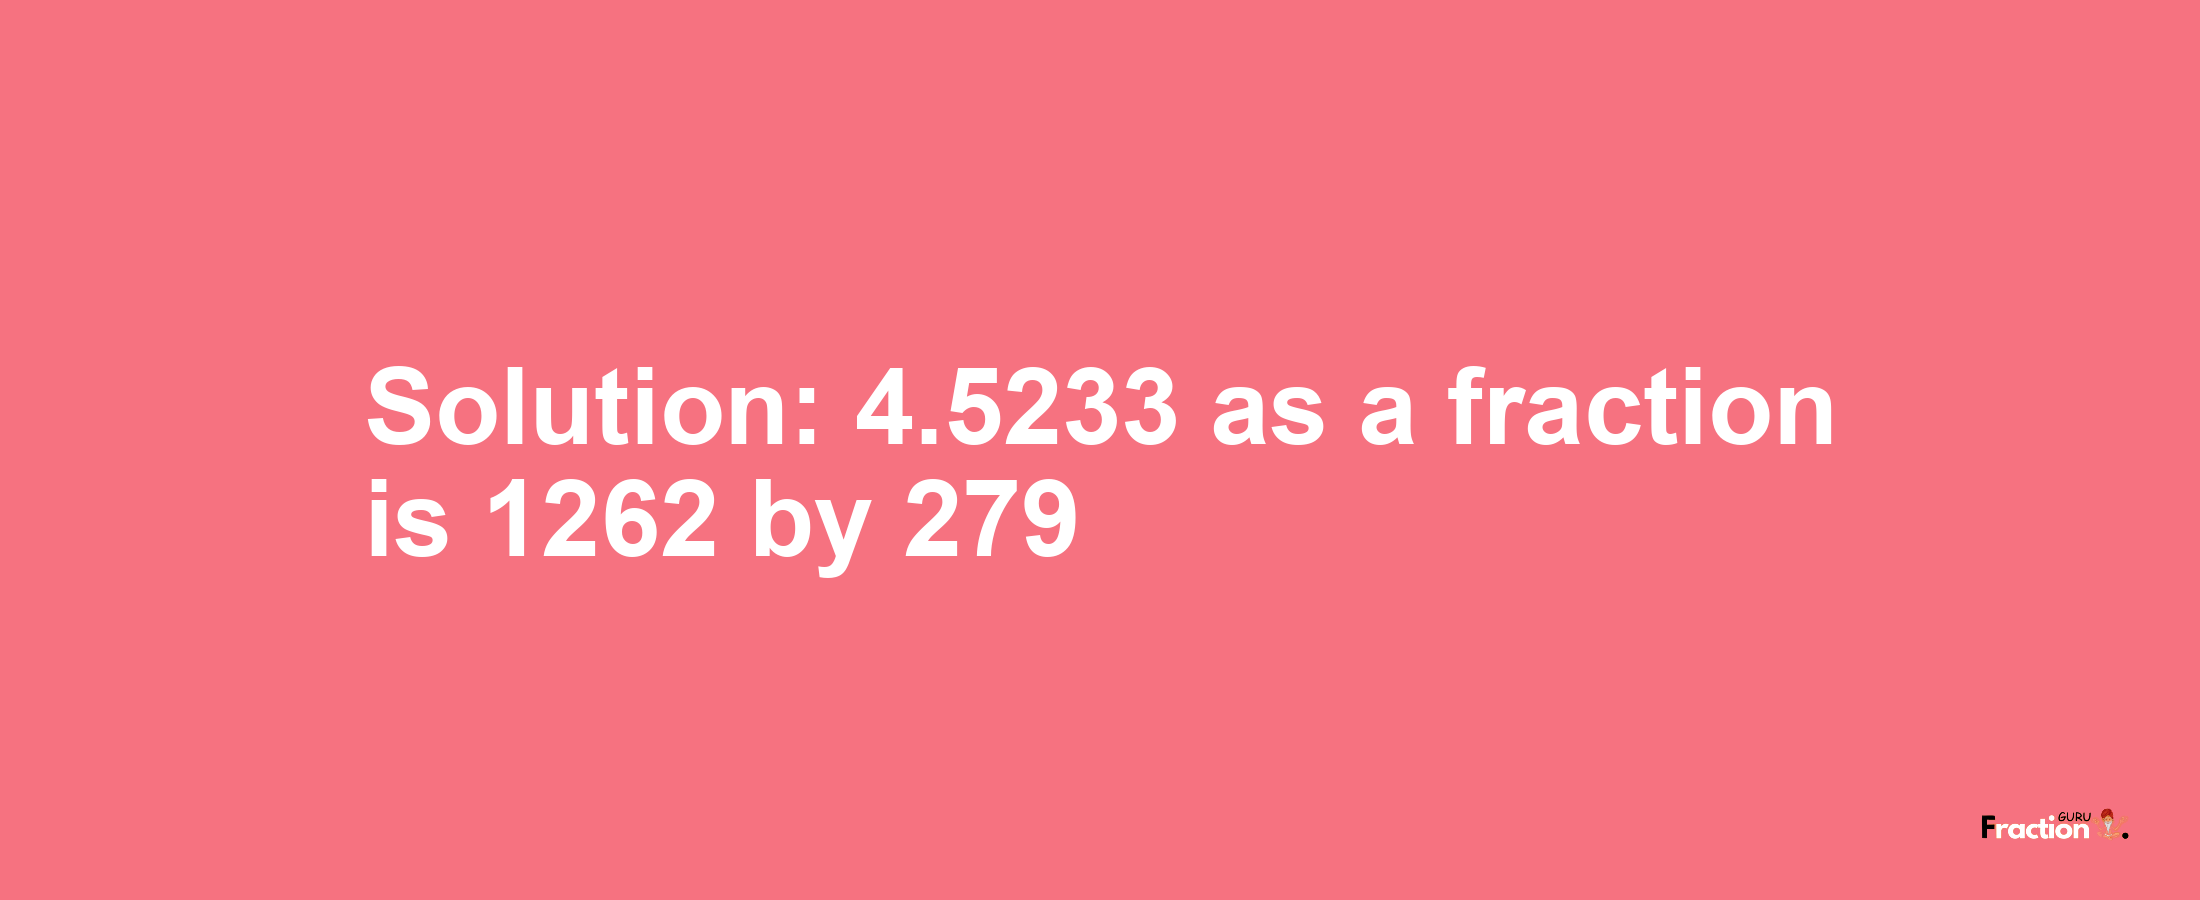 Solution:4.5233 as a fraction is 1262/279